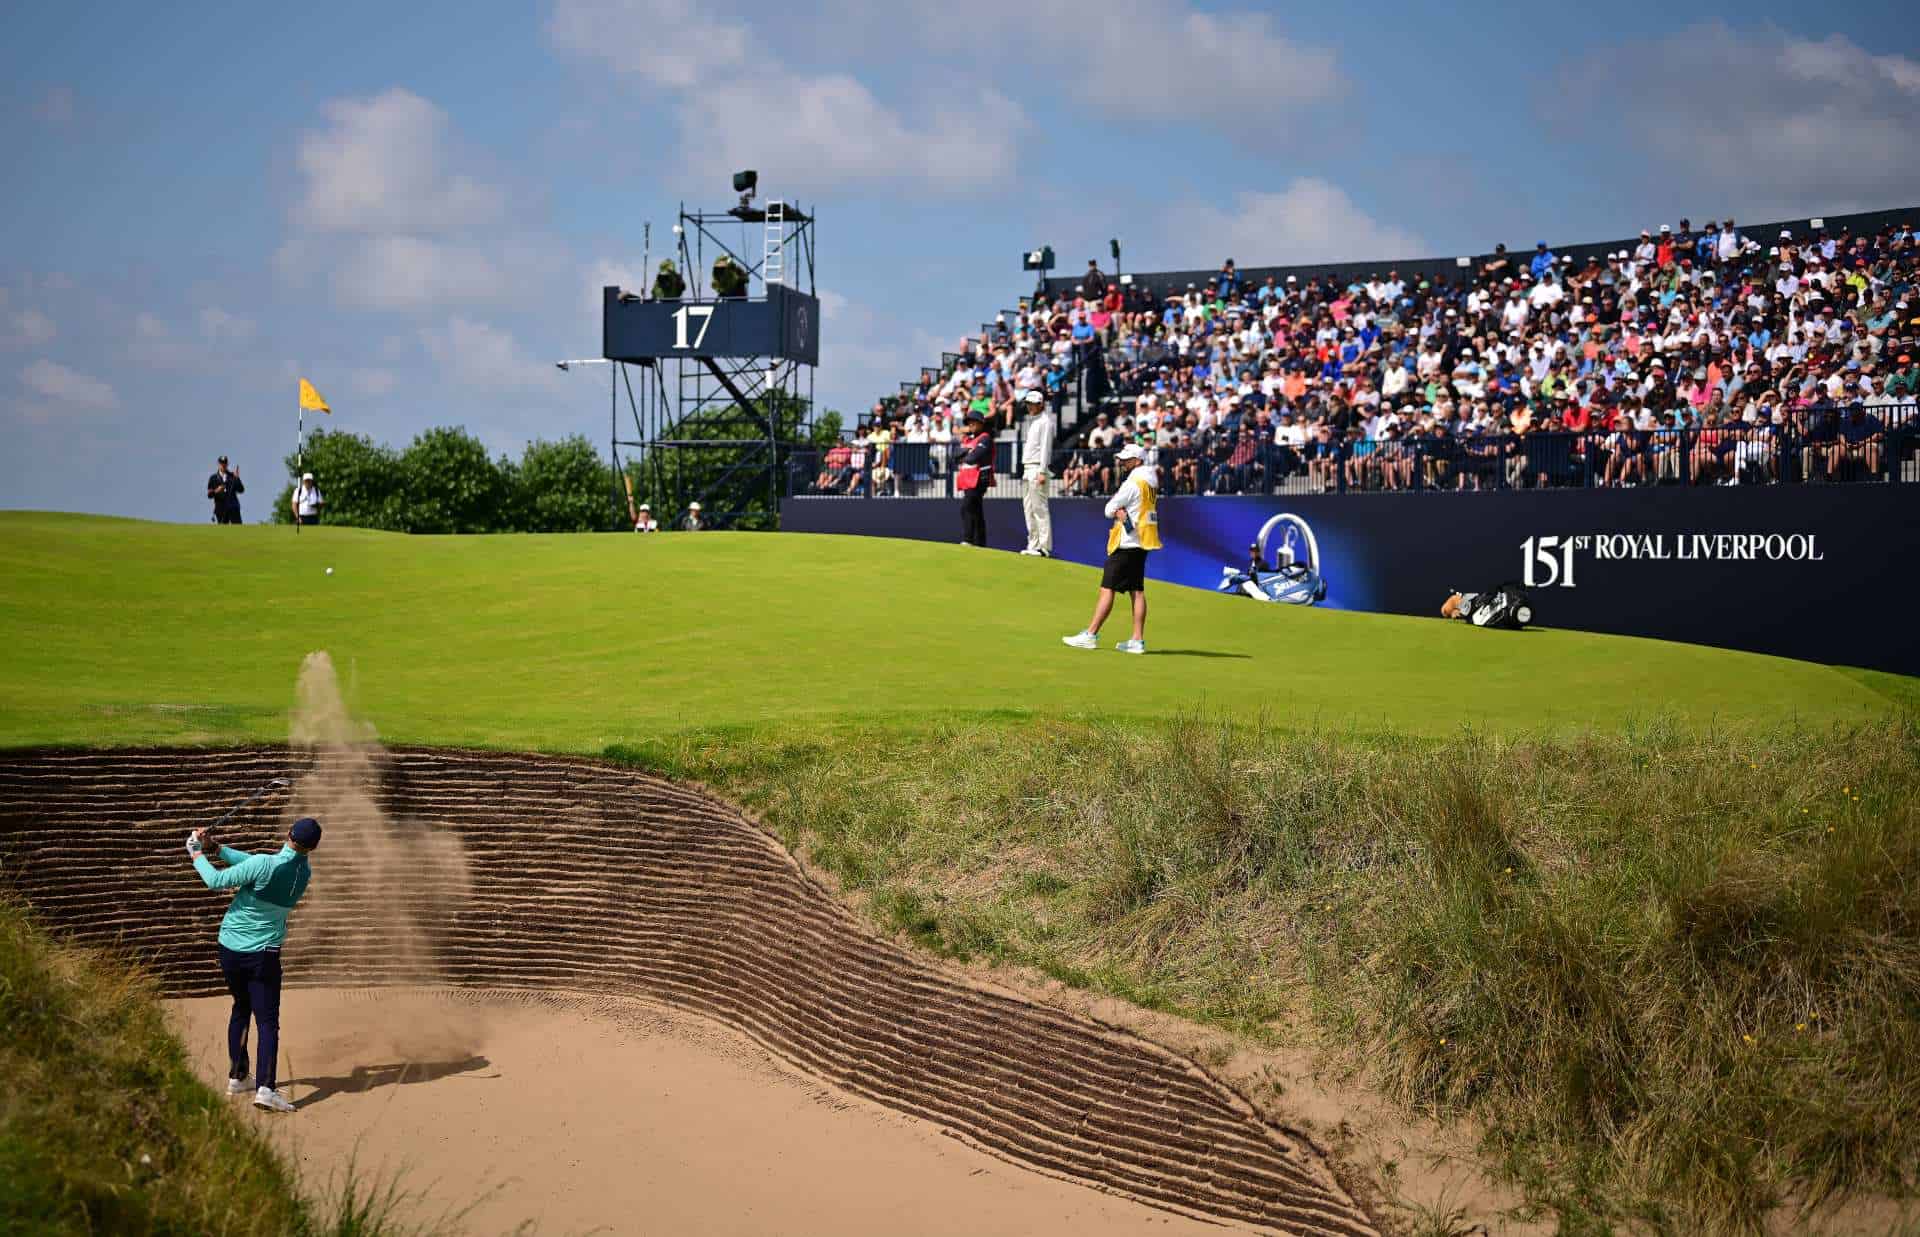 Golf's new Colosseum: Why we'll queue to see a player thrown to the lions at 17